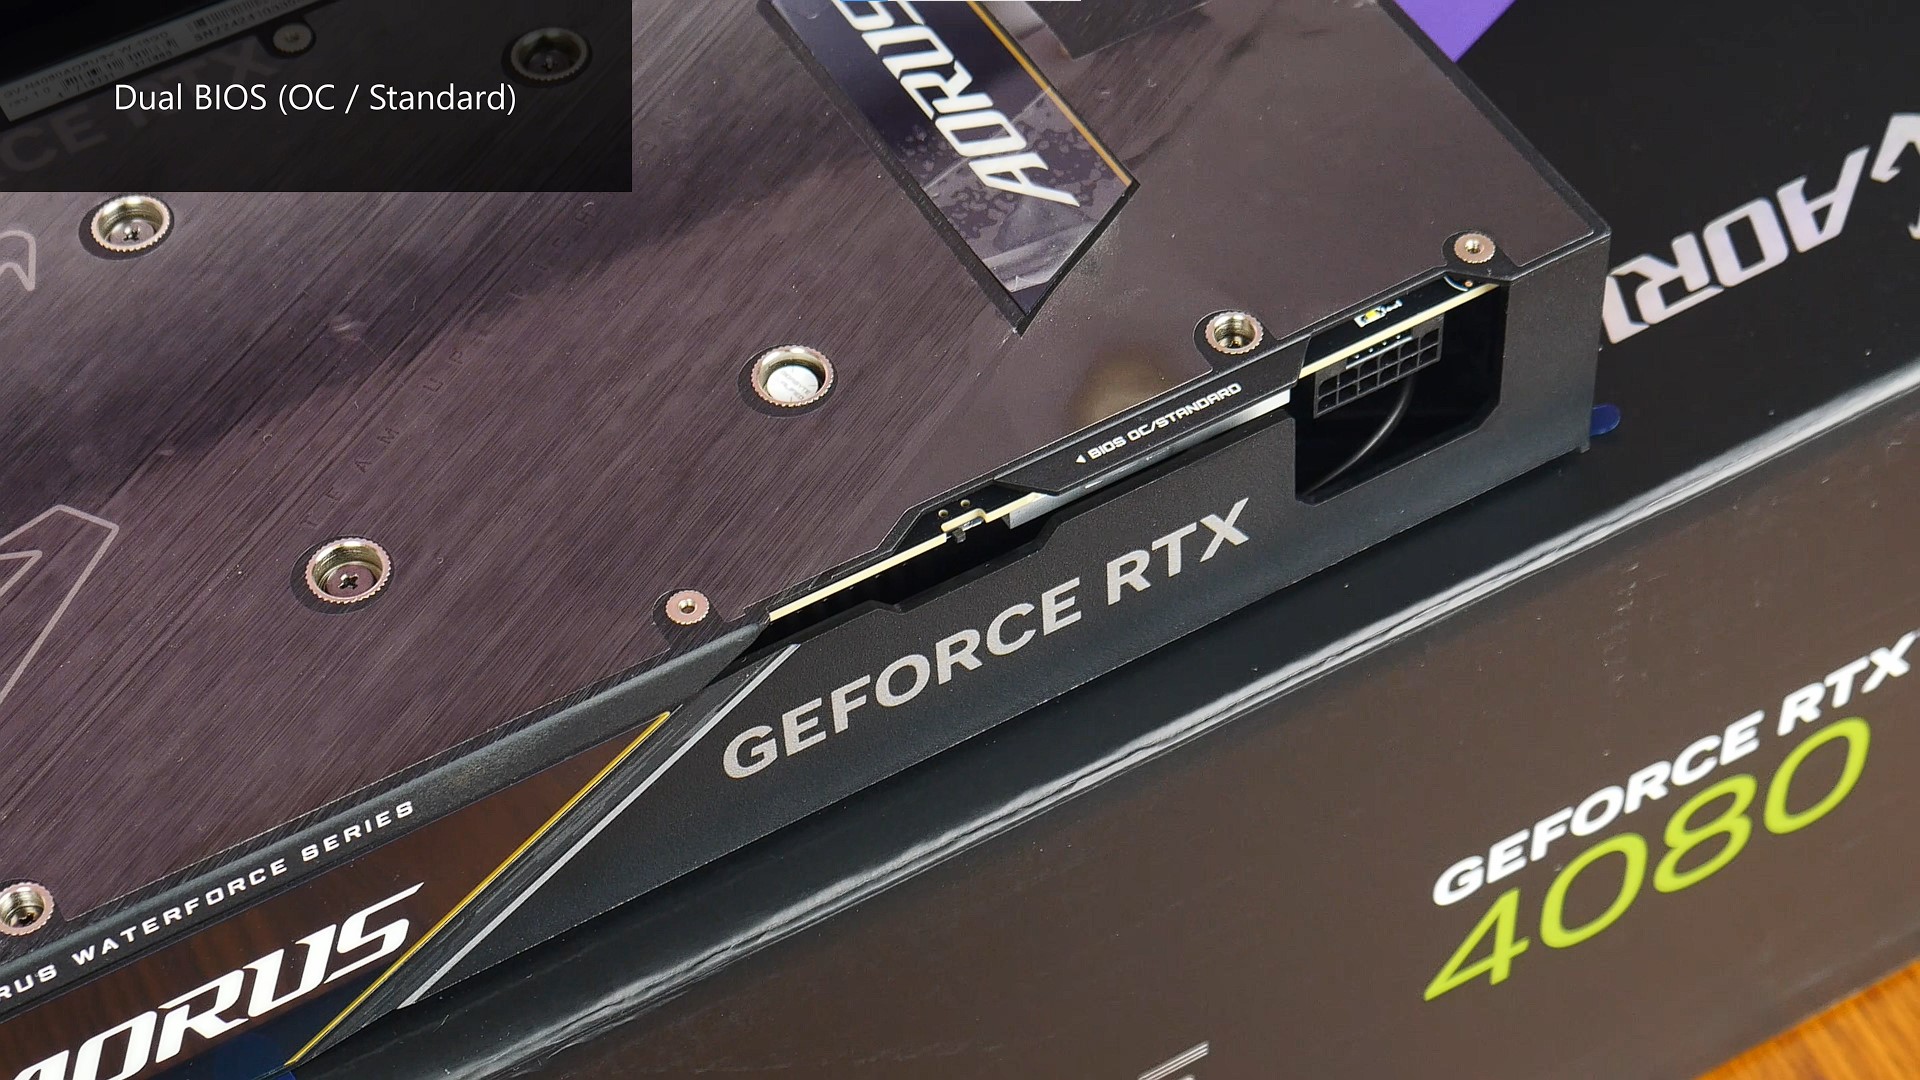 Unboxed: Gigabyte AORUS GeForce RTX 4080 16GB XTREME WATERFORCE